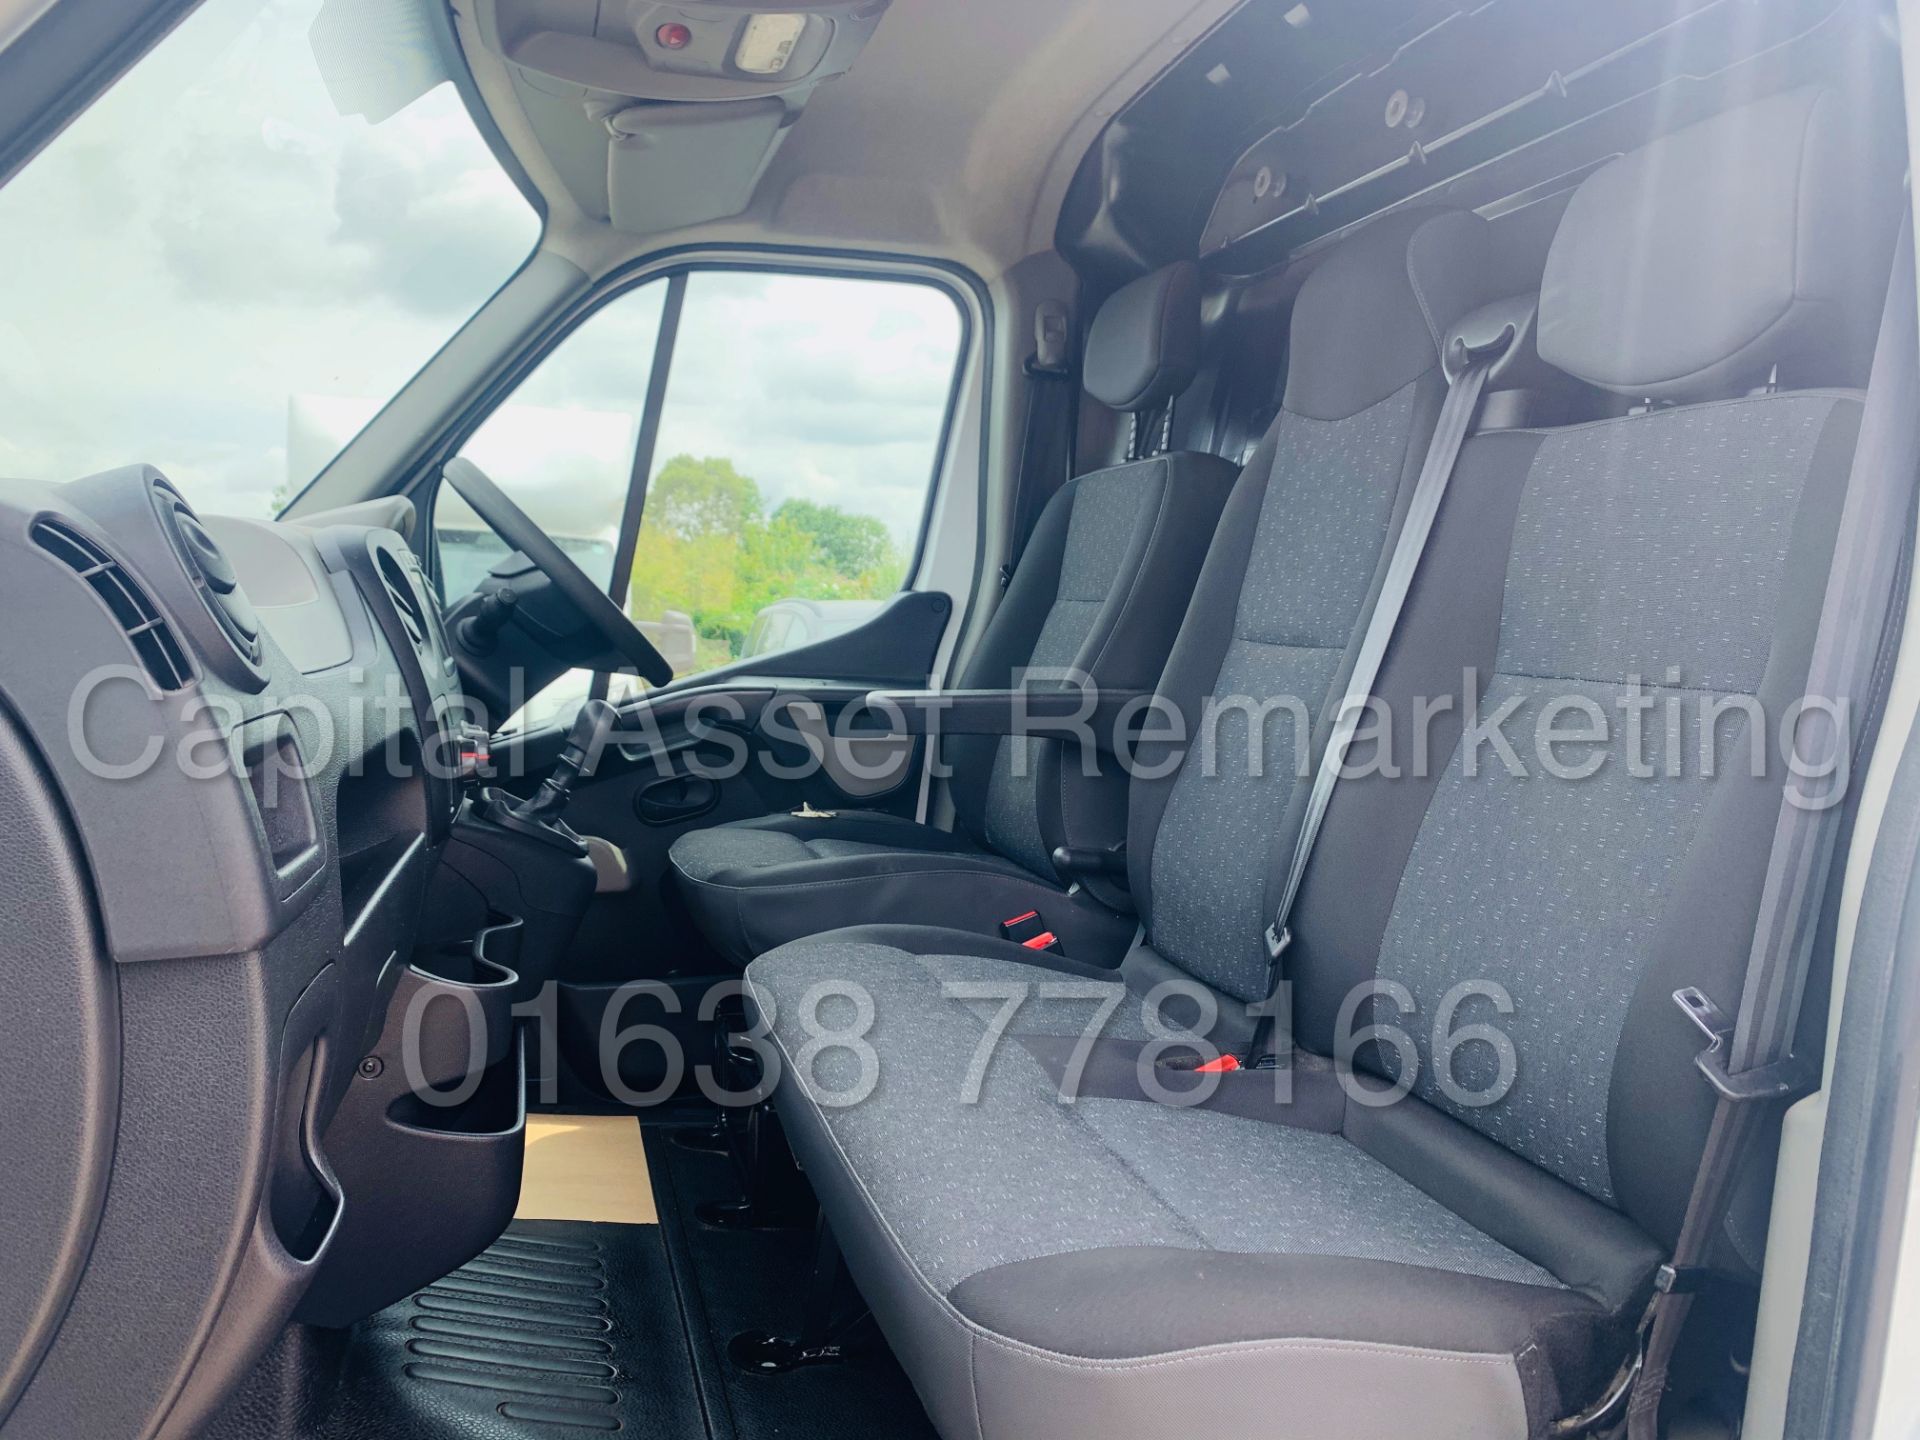 (ON SALE) VAUXHALL MOVANO *MWB HI-ROOF* (2018 - EURO 6) '2.3 CDTI - 130 BHP - 6 SPEED' (1 OWNER) - Image 22 of 39